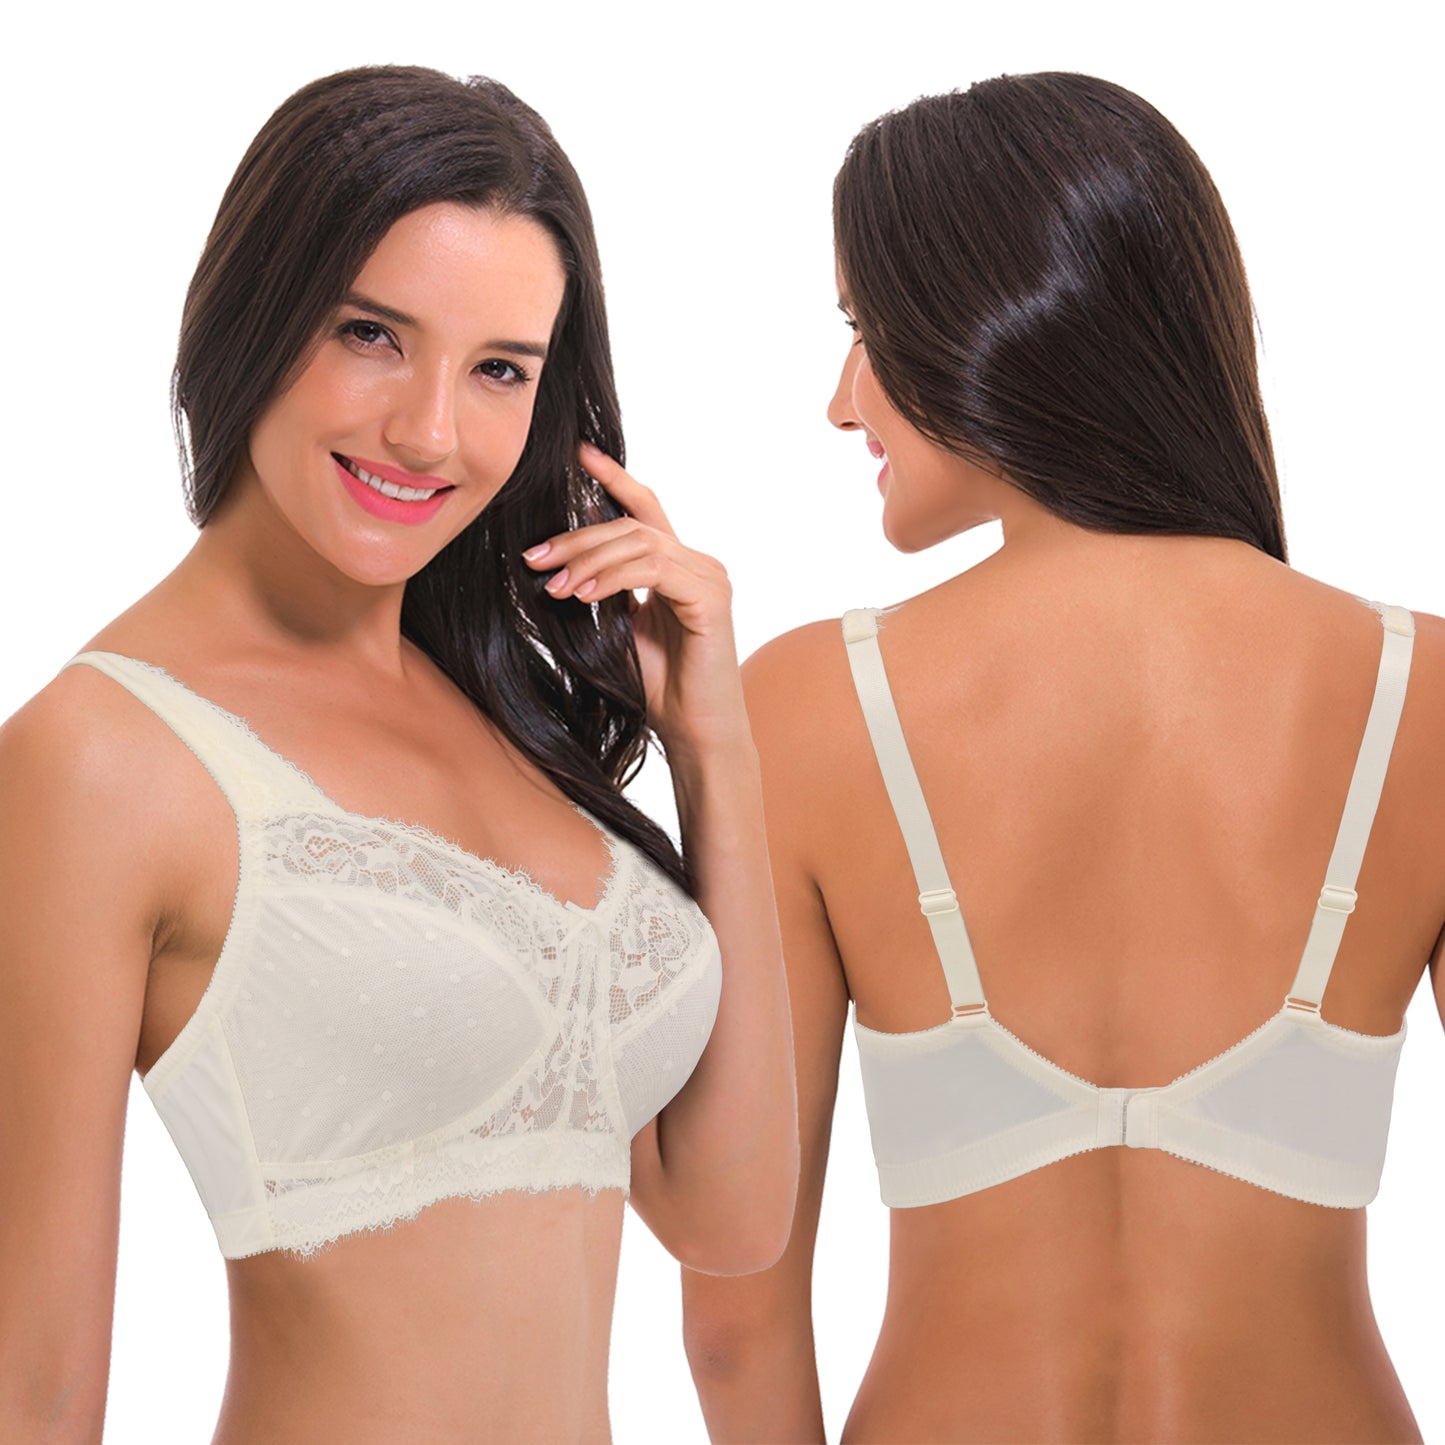 Women's Plus Size Minimizer Lace Full Coverage Unlined Wireless Bra-2Pack-Navy,White